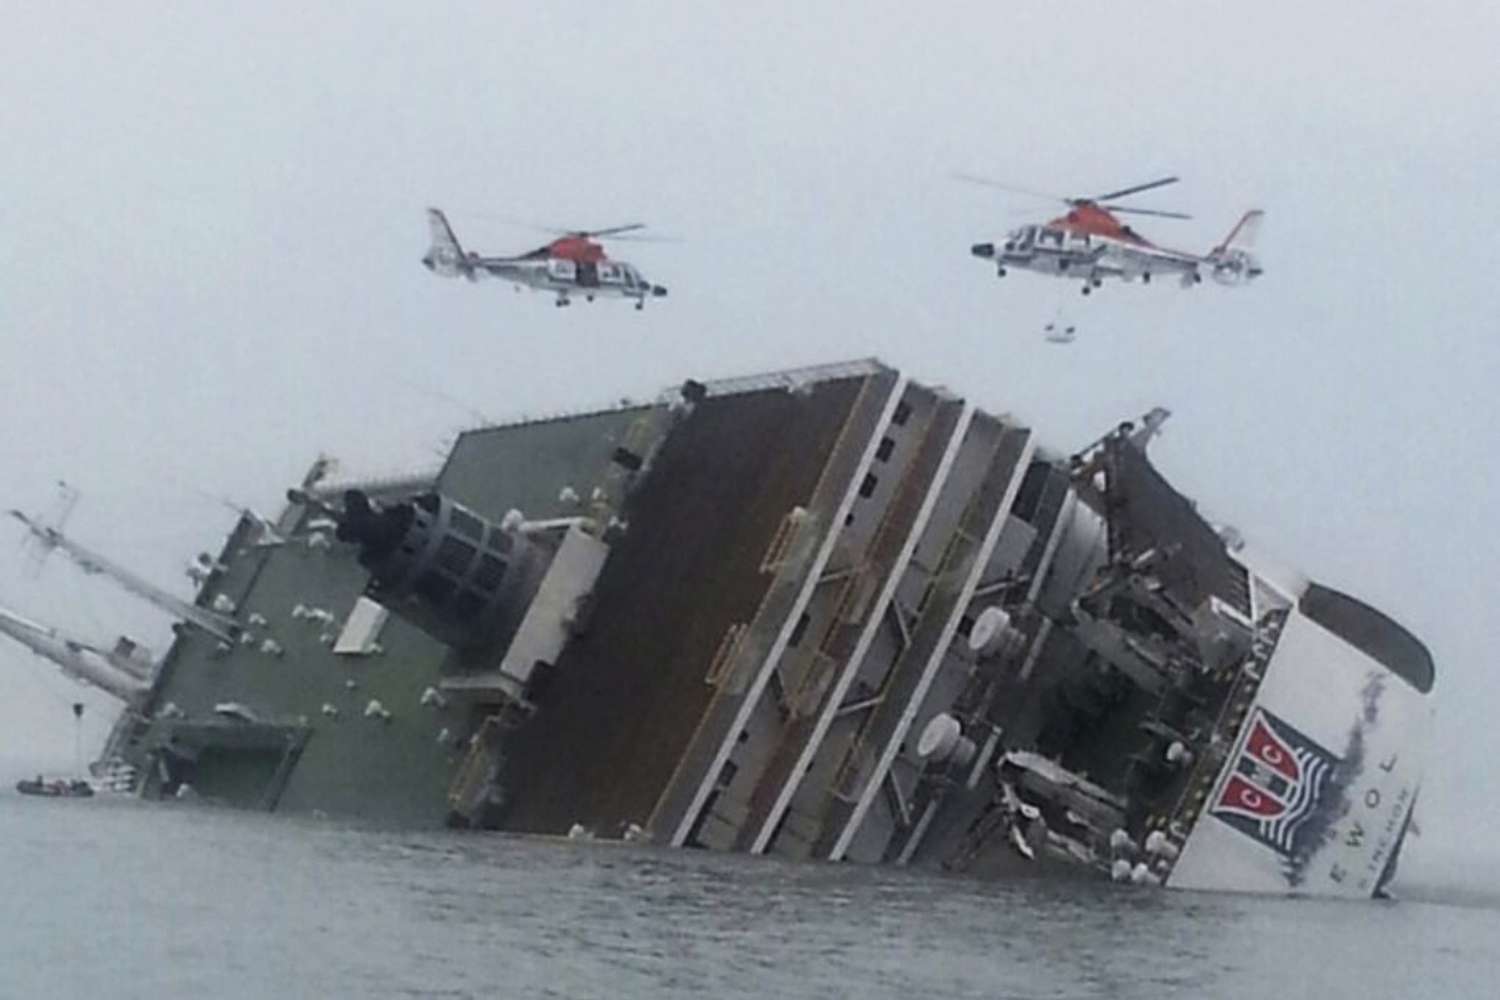 Rescue helicopters flying over the passenger ship Sewol as it sinks in waters off South Korea's southwestern coast on April 16, 2014.